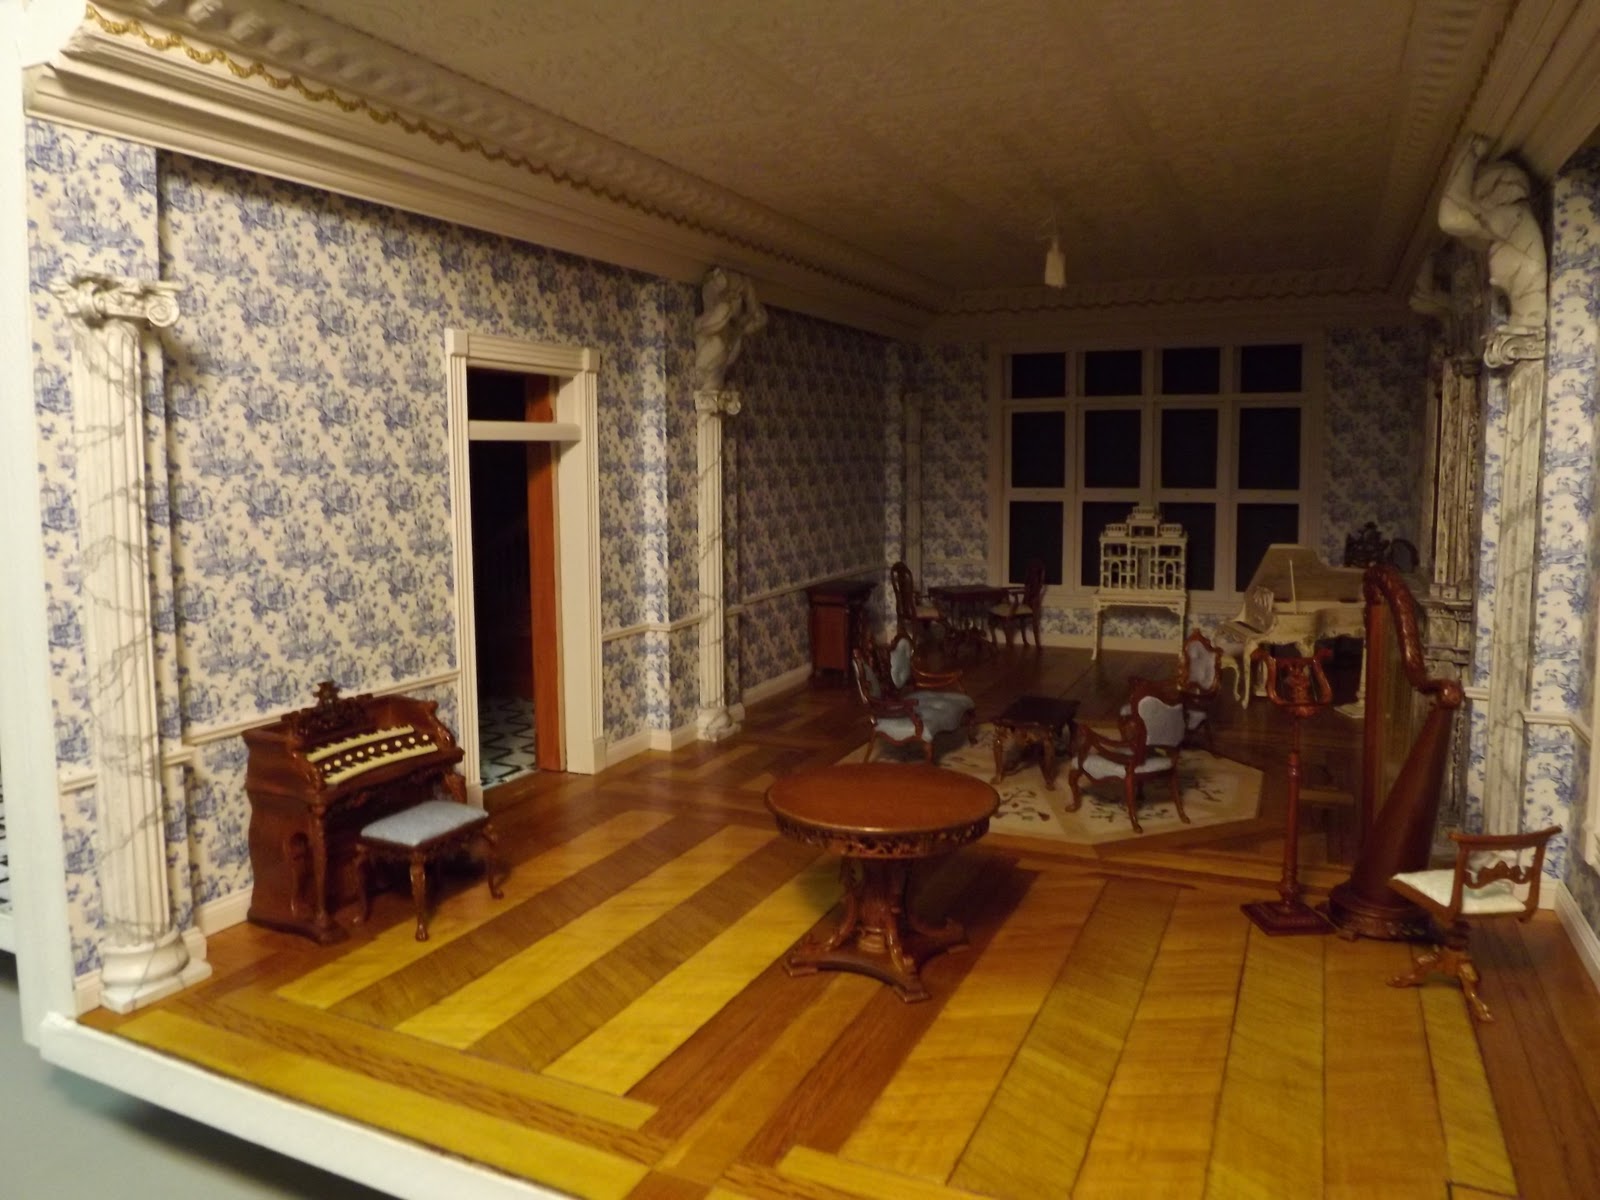 Late Victorian English Manor Dollhouse: 1/12 Miniature from Scratch ...